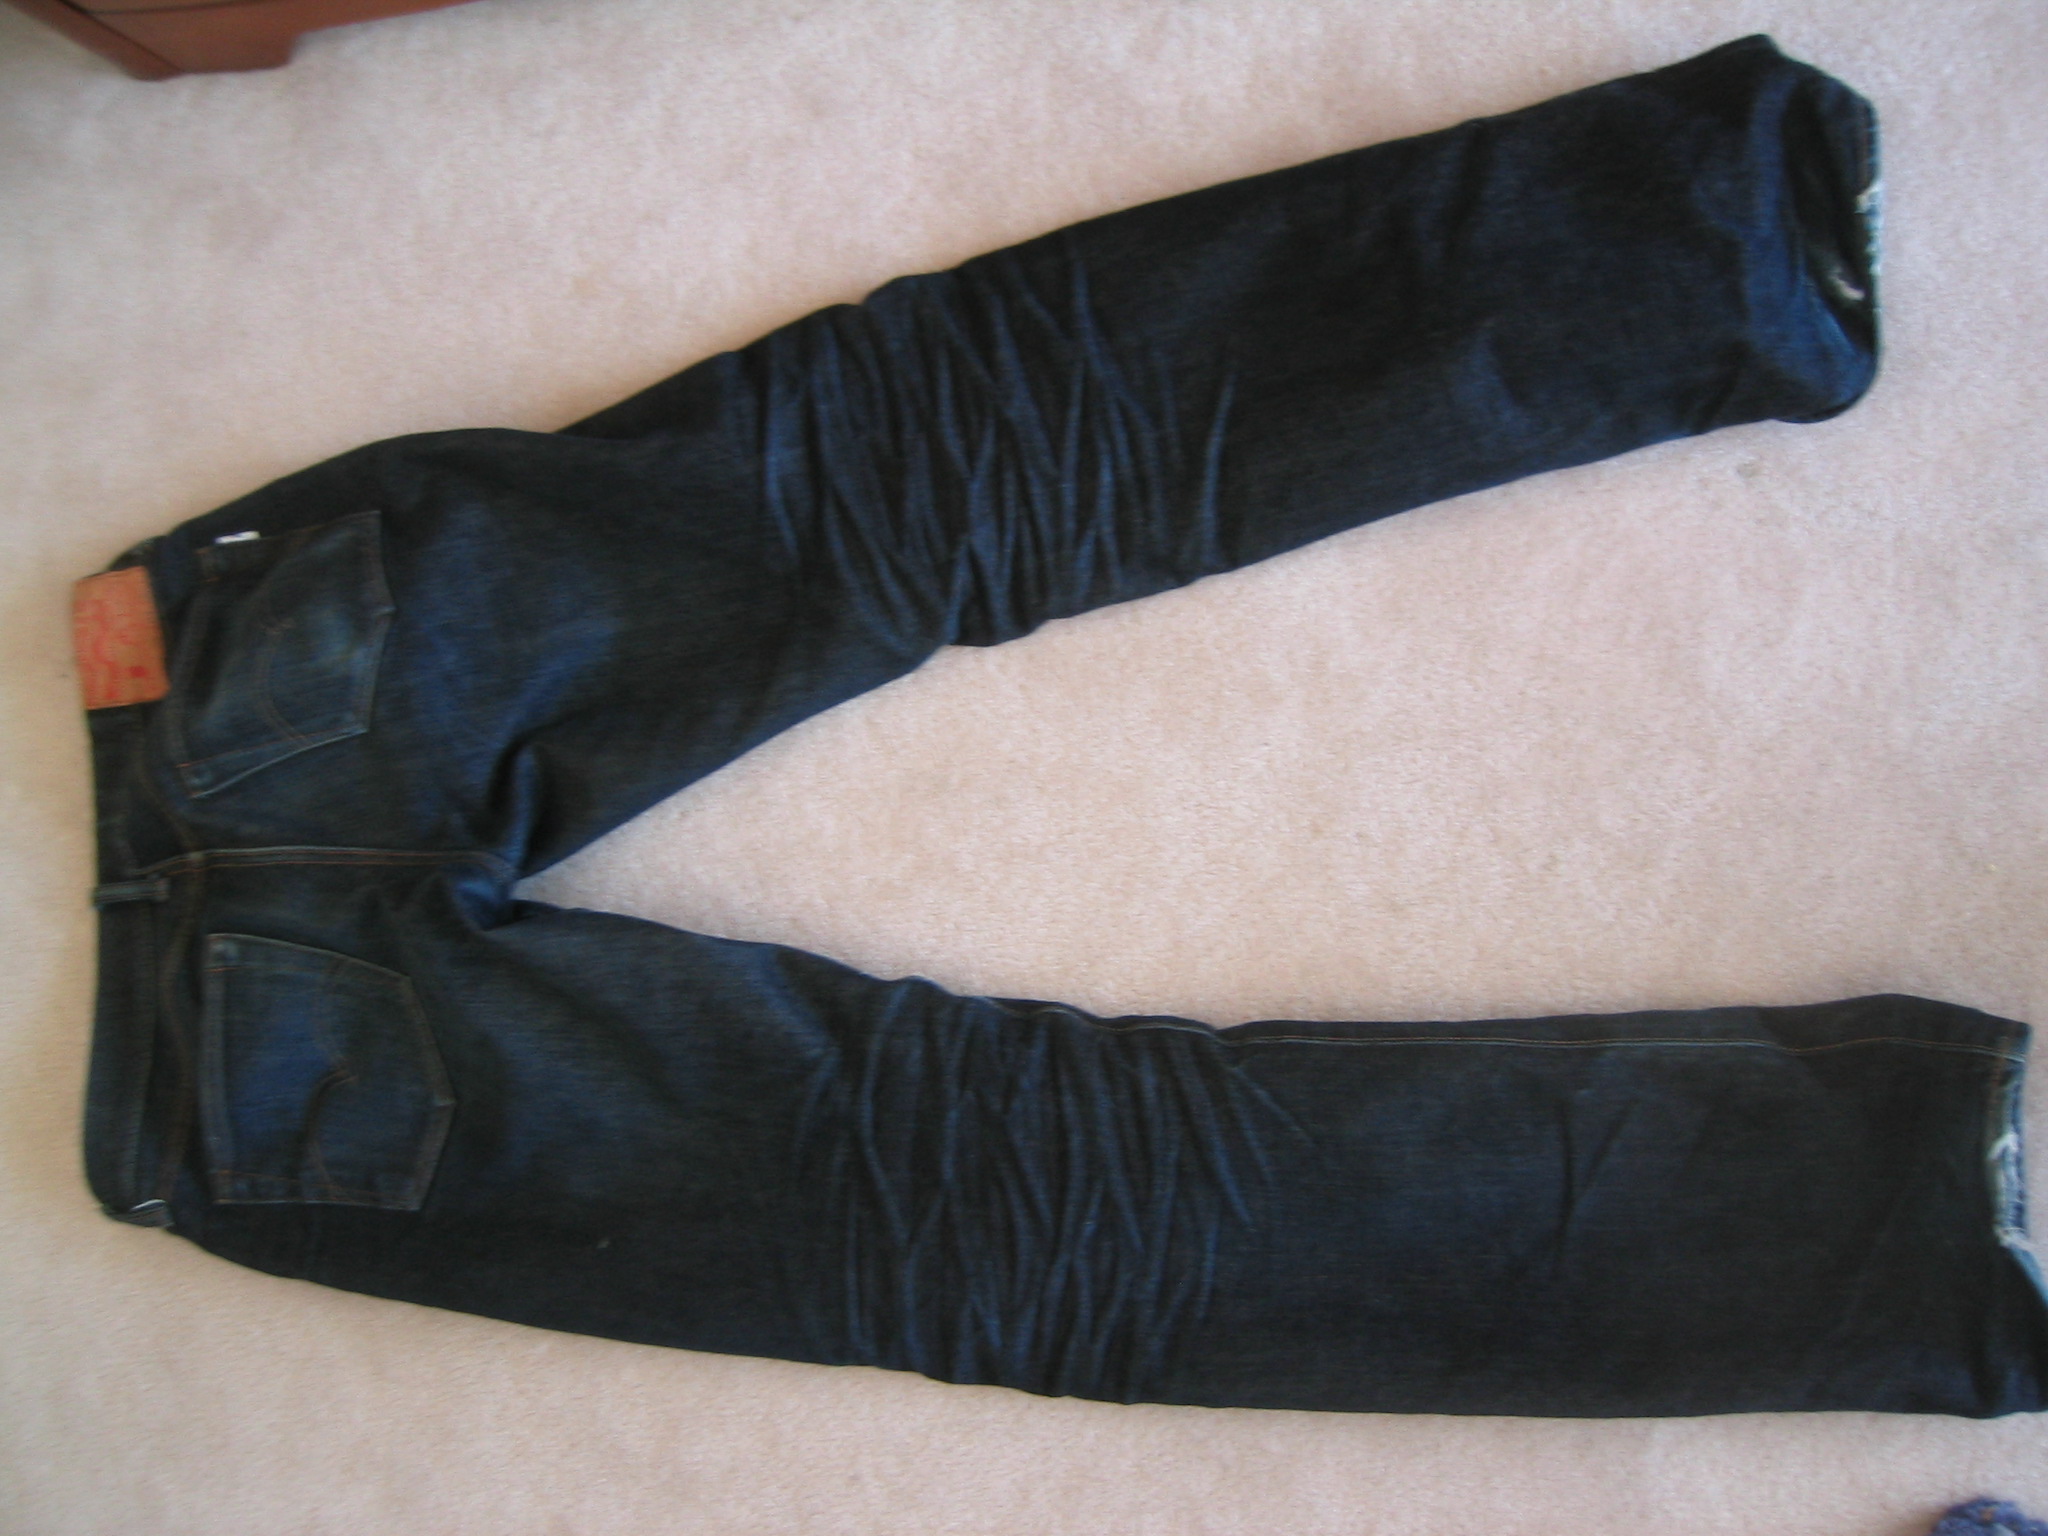 SD103s around six months. 
Worn almost everyday. One cold soak, 2 washes, no dryer time.